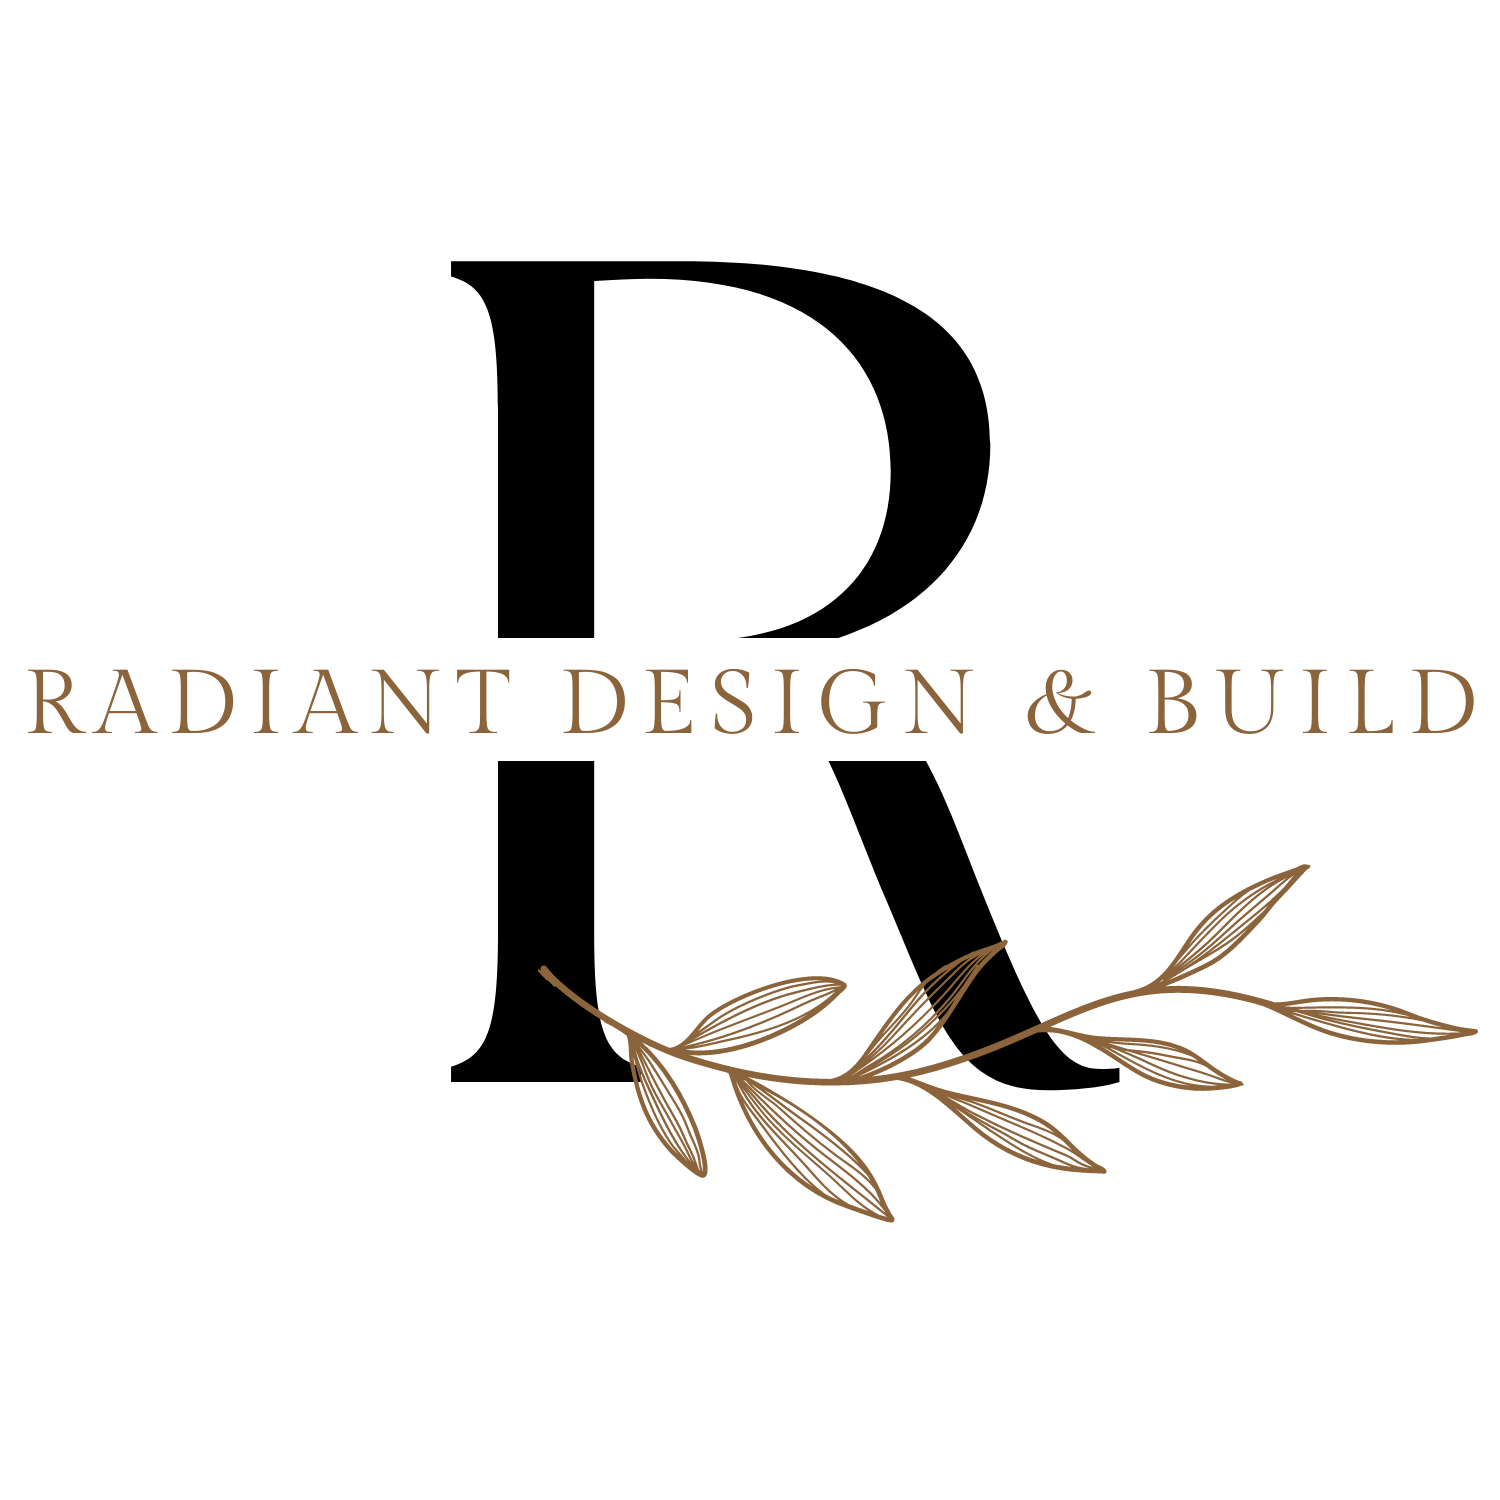 Radiant Design &amp; Build - A Bathroom Remodeling/Renovation Contracting Company